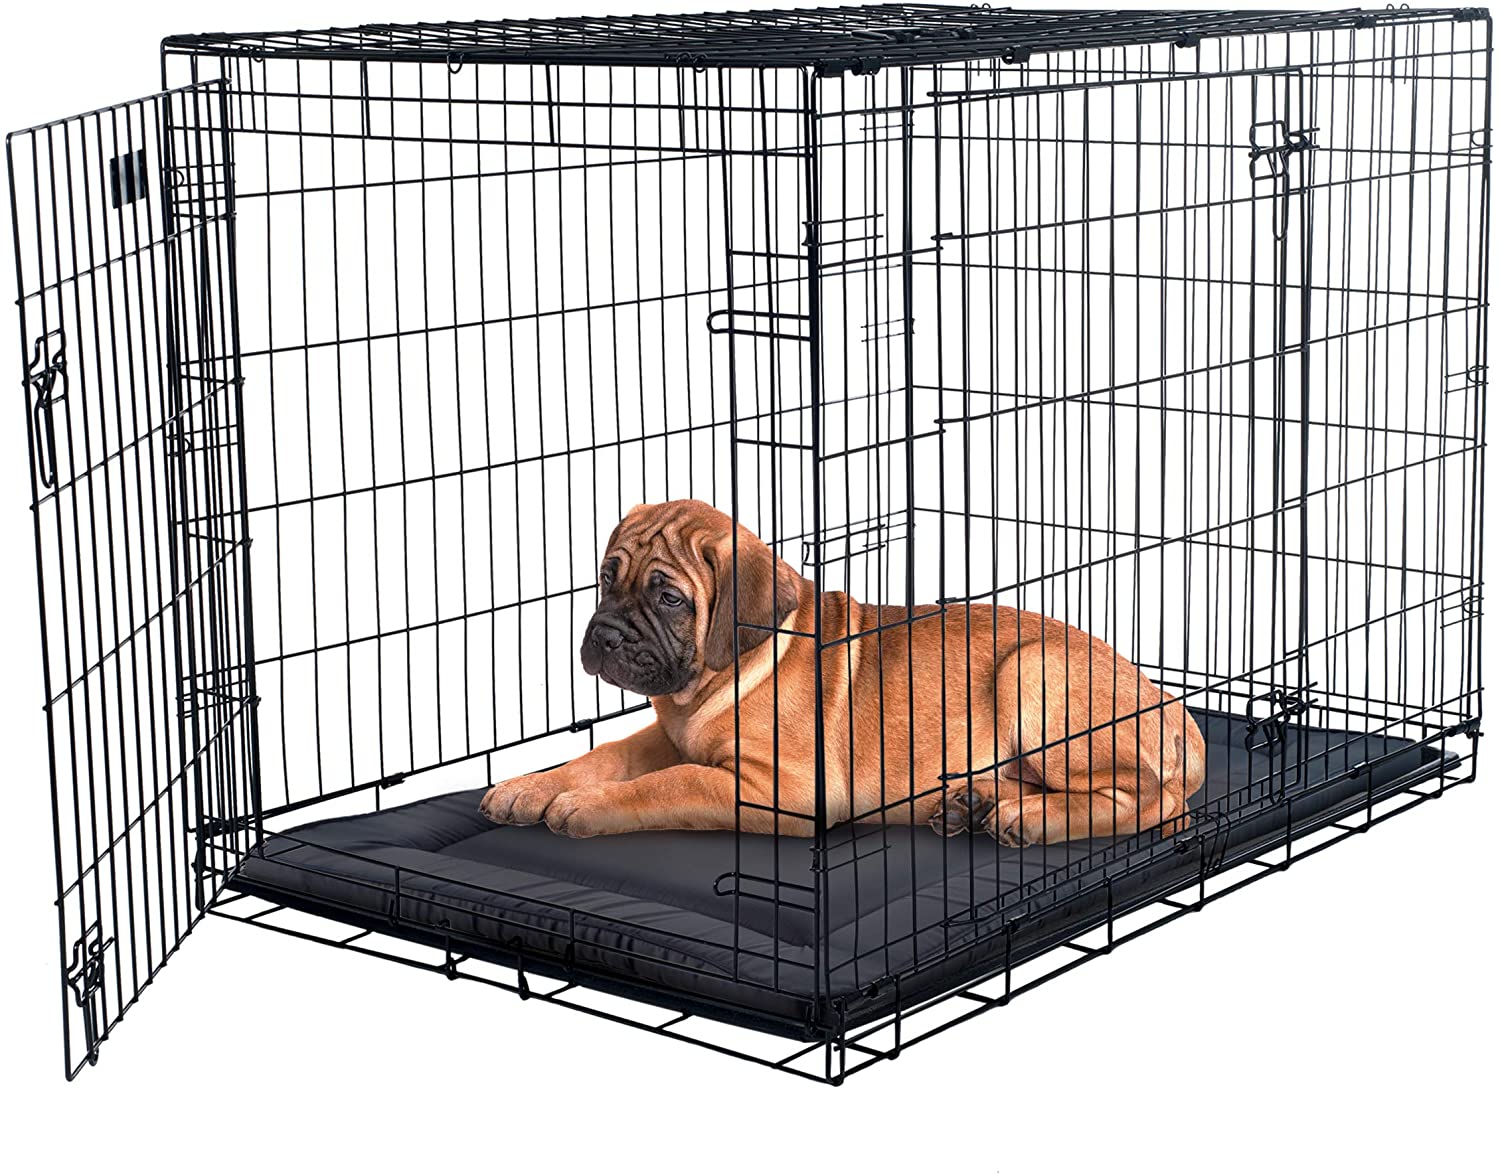 PETMAKER Waterproof Dog Crate Pad Collection - Water Repelling Kennel Bed, Raised Edge, Easy-To-Clean Multi-Purpose Mat for Home & Car Travel